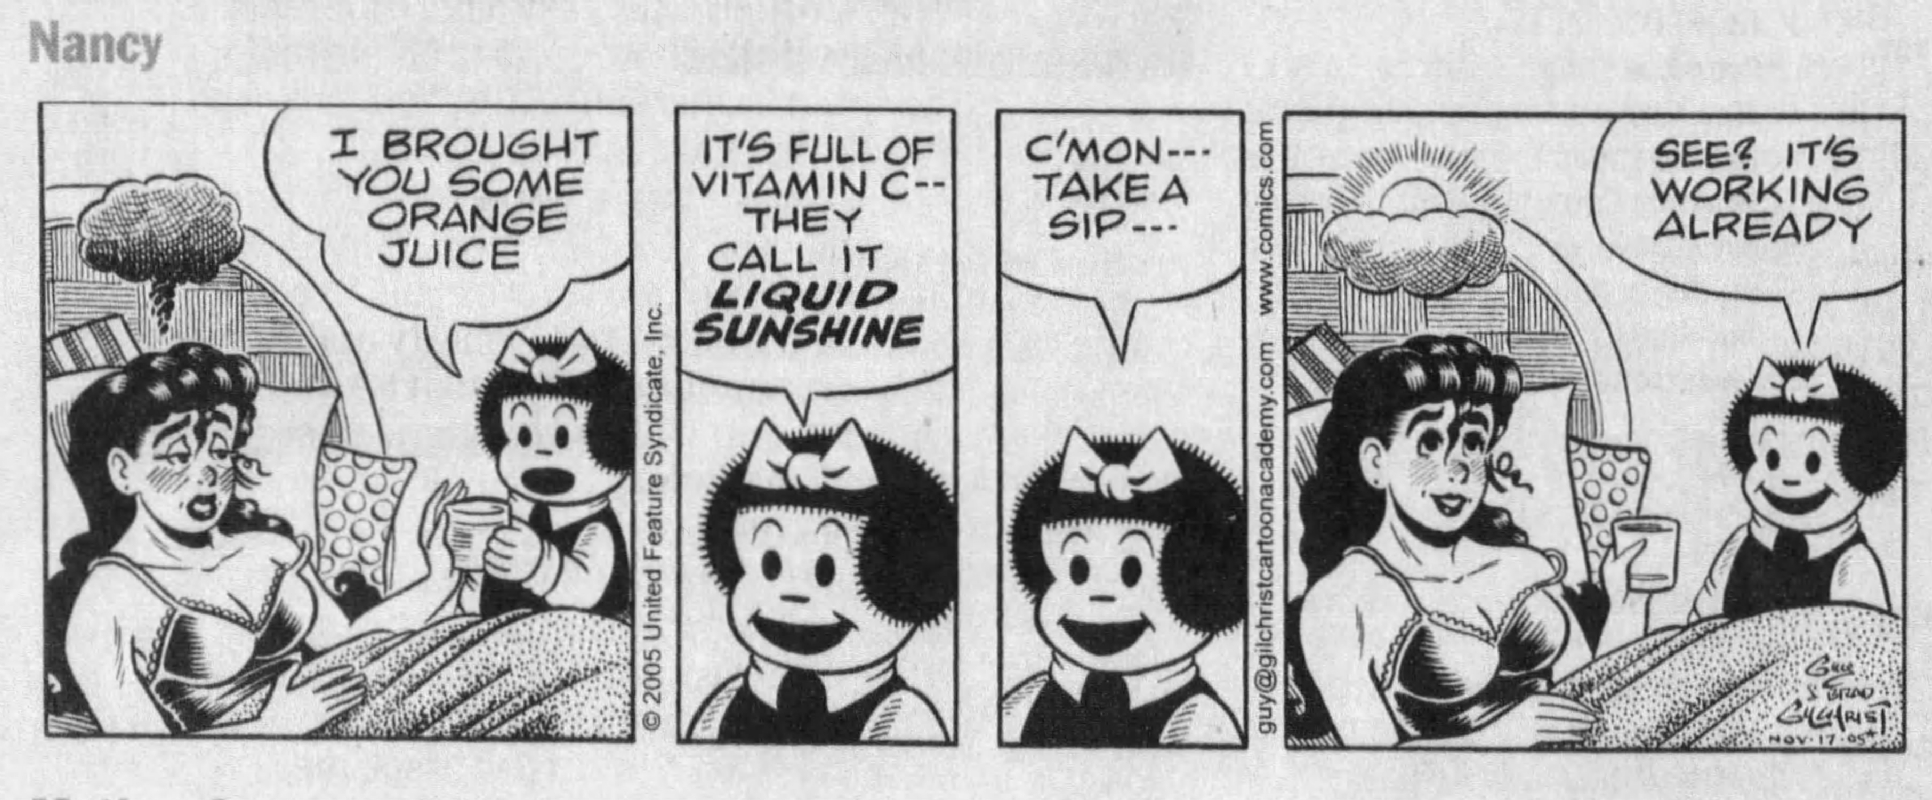 Nancy Comic Strip 2005 11 17 Featuring Aunt Fritzi Ritz By Guy And Brad Gilchrist In Philip R